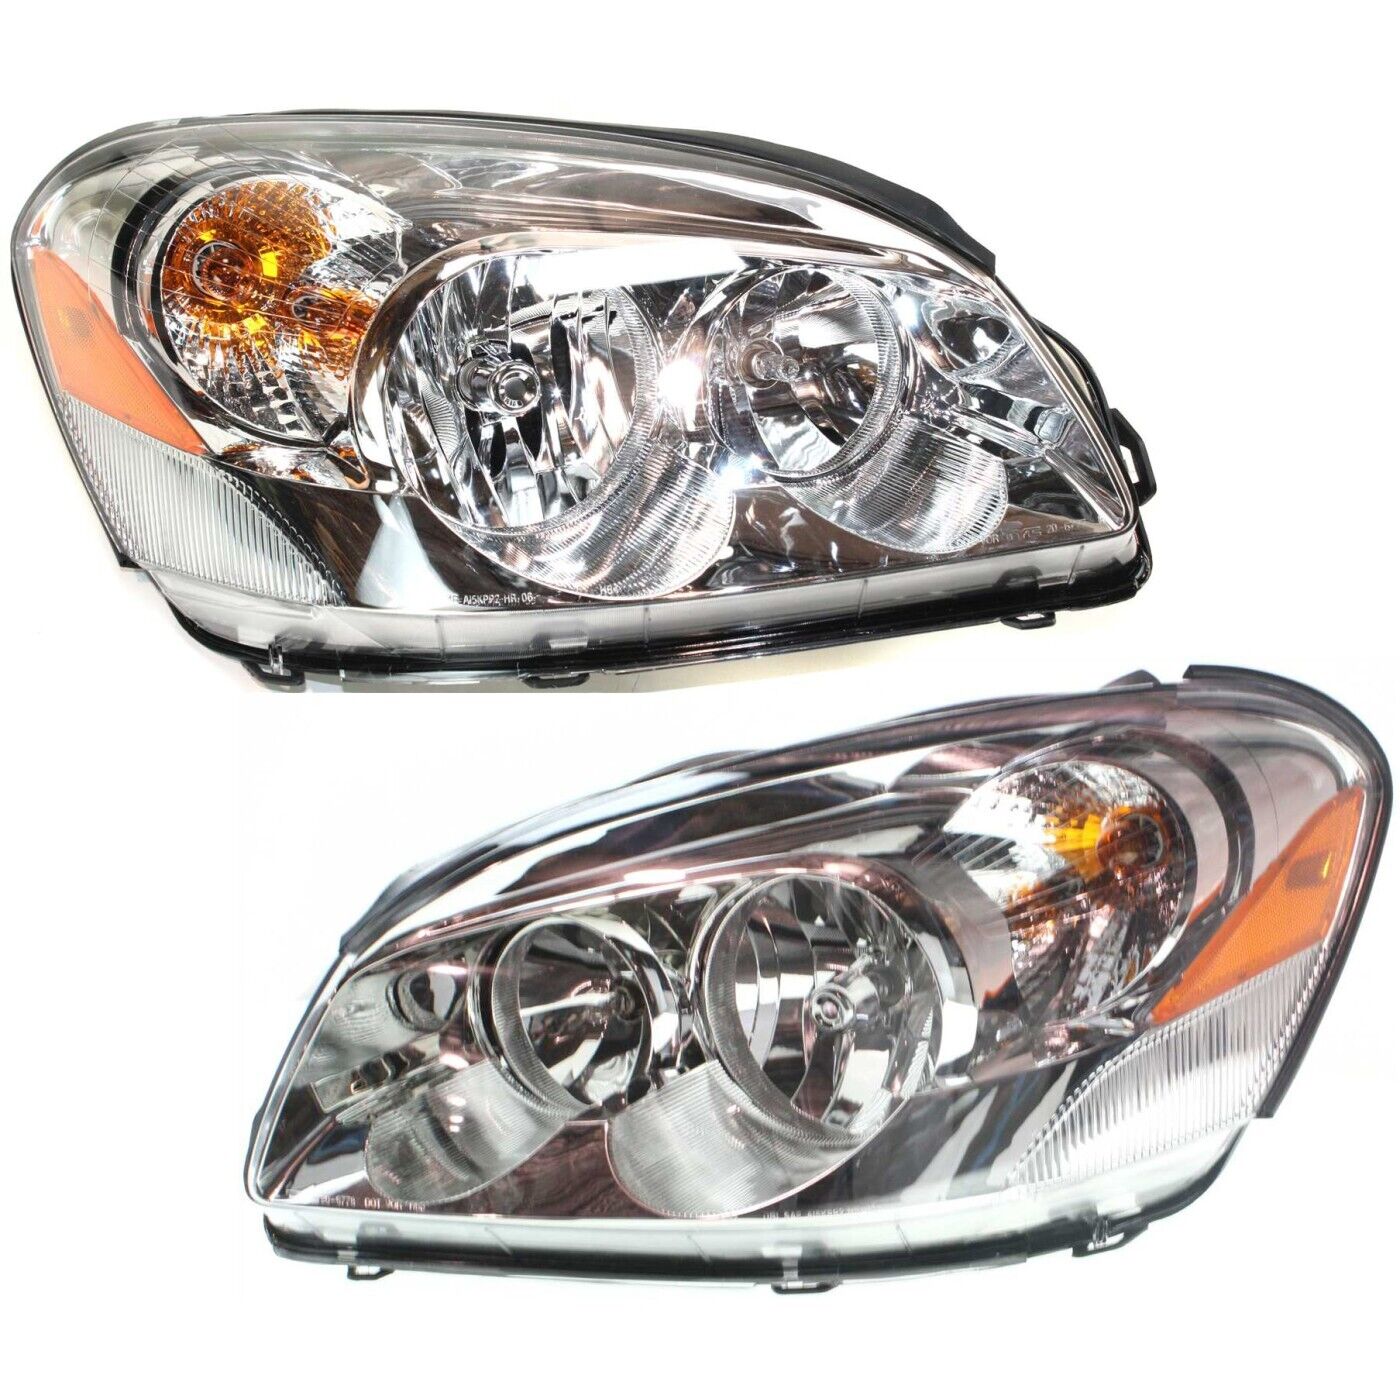 Headlight Set For 2006-2007 Buick Lucerne Left and Right With Bulb 2Pc